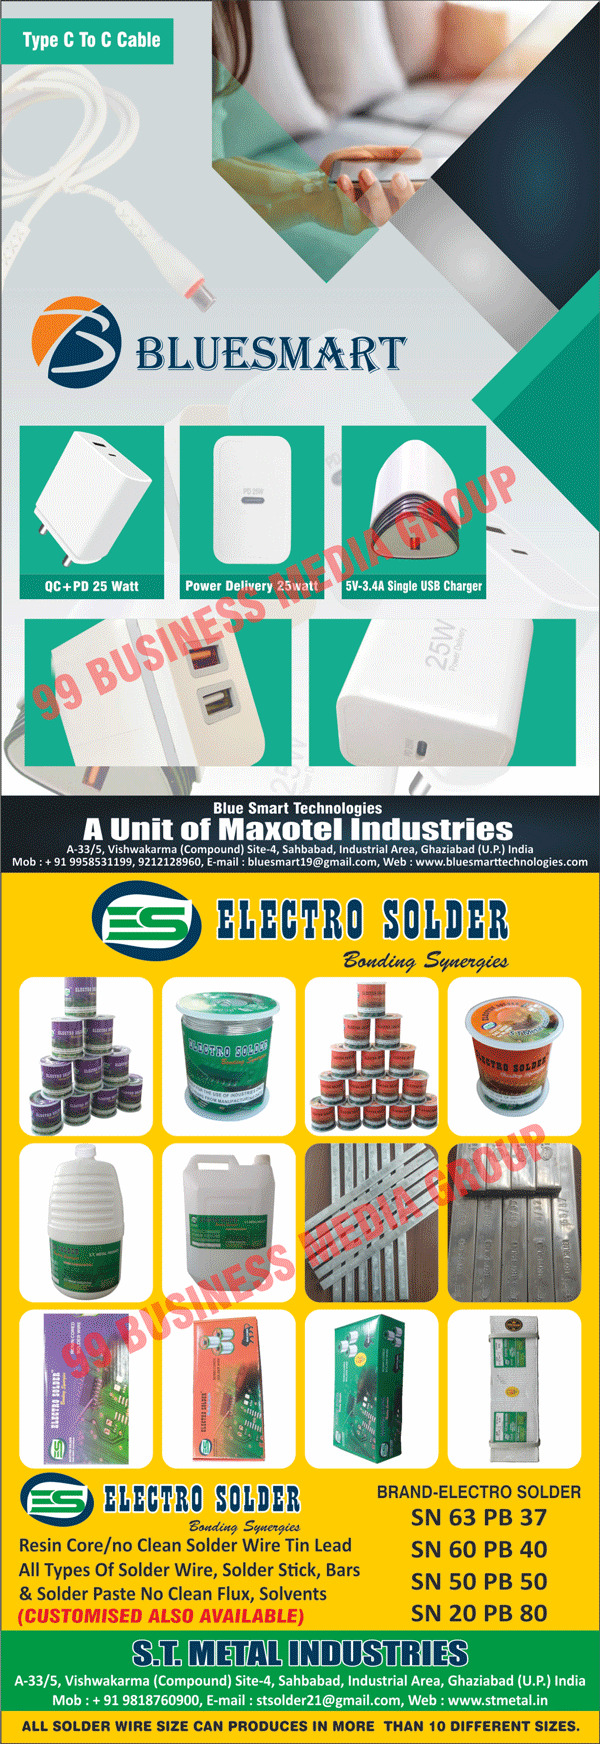 Solder Wires, Solder Sticks, Bars, Solder Paste No Clean Fluxes, Solvents, Resin Cores, Type C To C Cables, Watts, Single USB Chargers